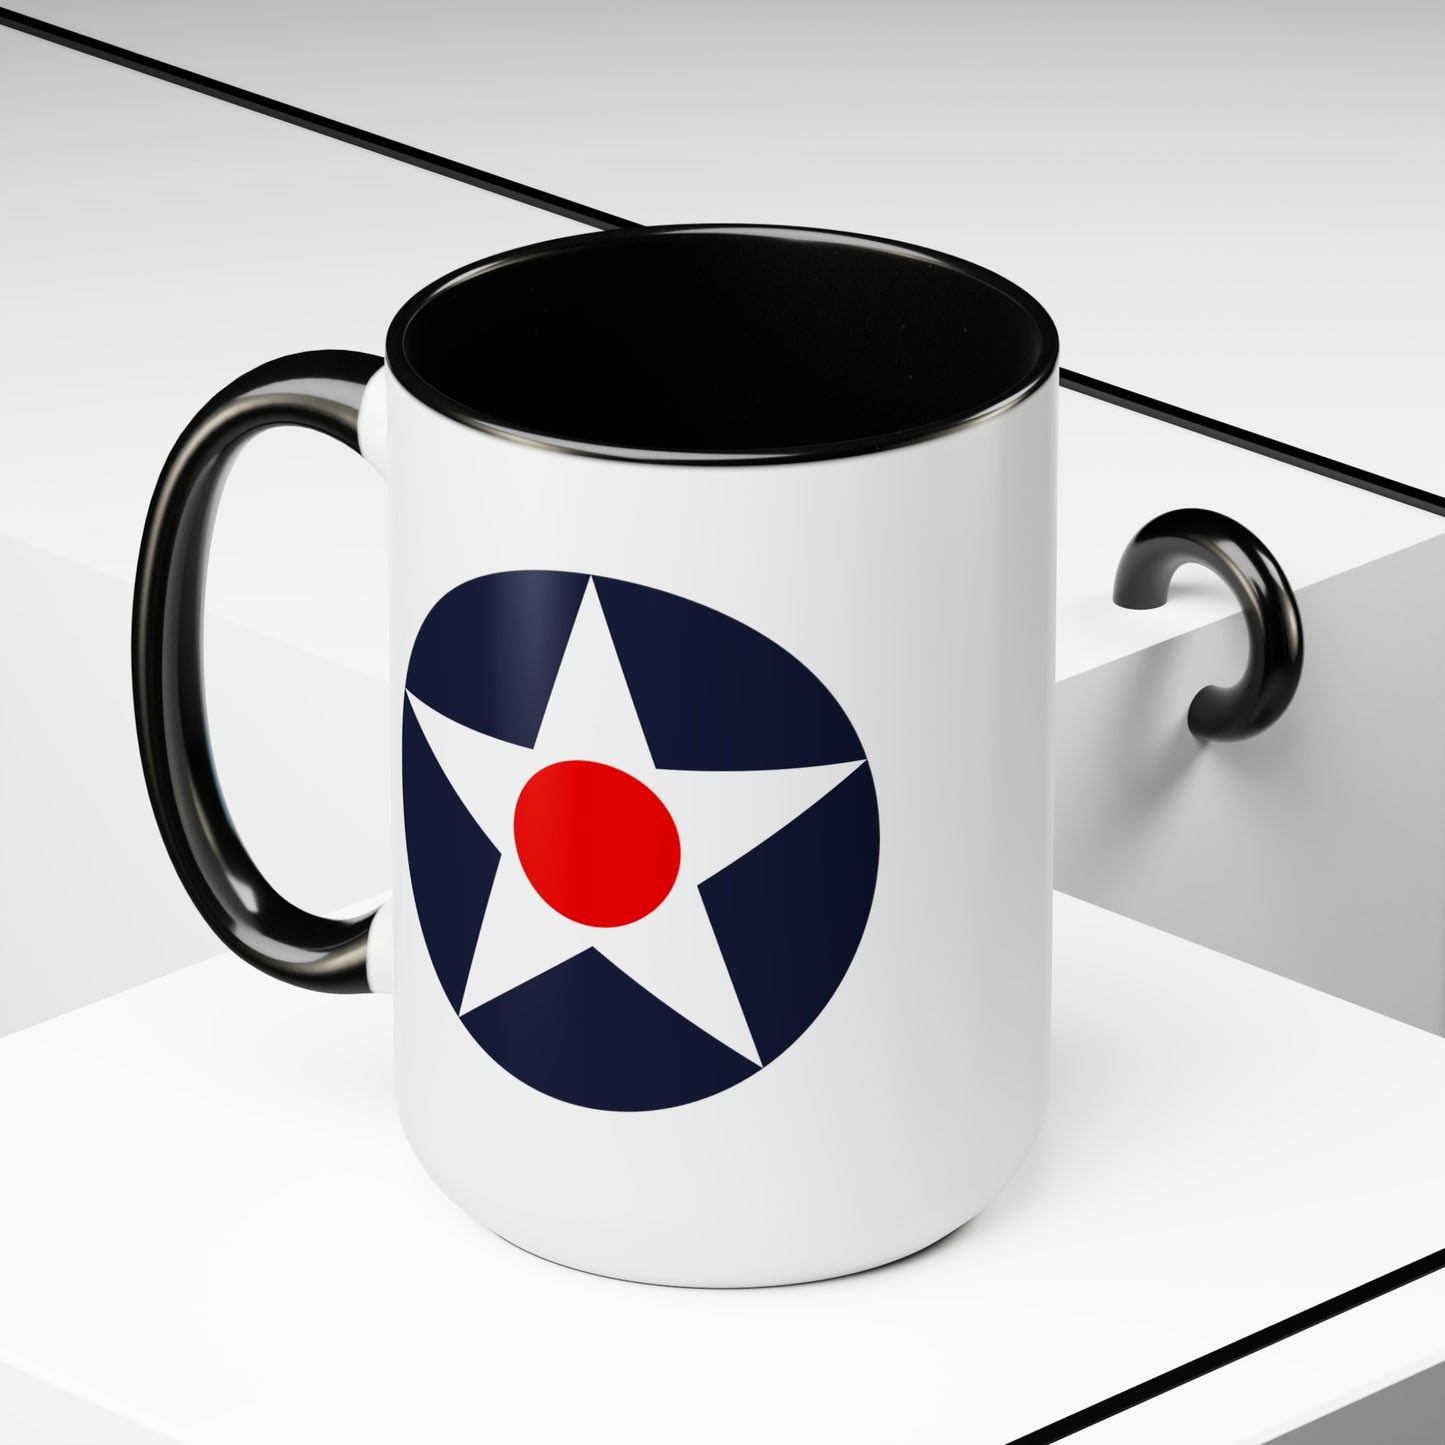 US Army Air Corps Roundel Coffee Mug - Double Sided Black Accent Ceramic 15oz - by TheGlassyLass.com